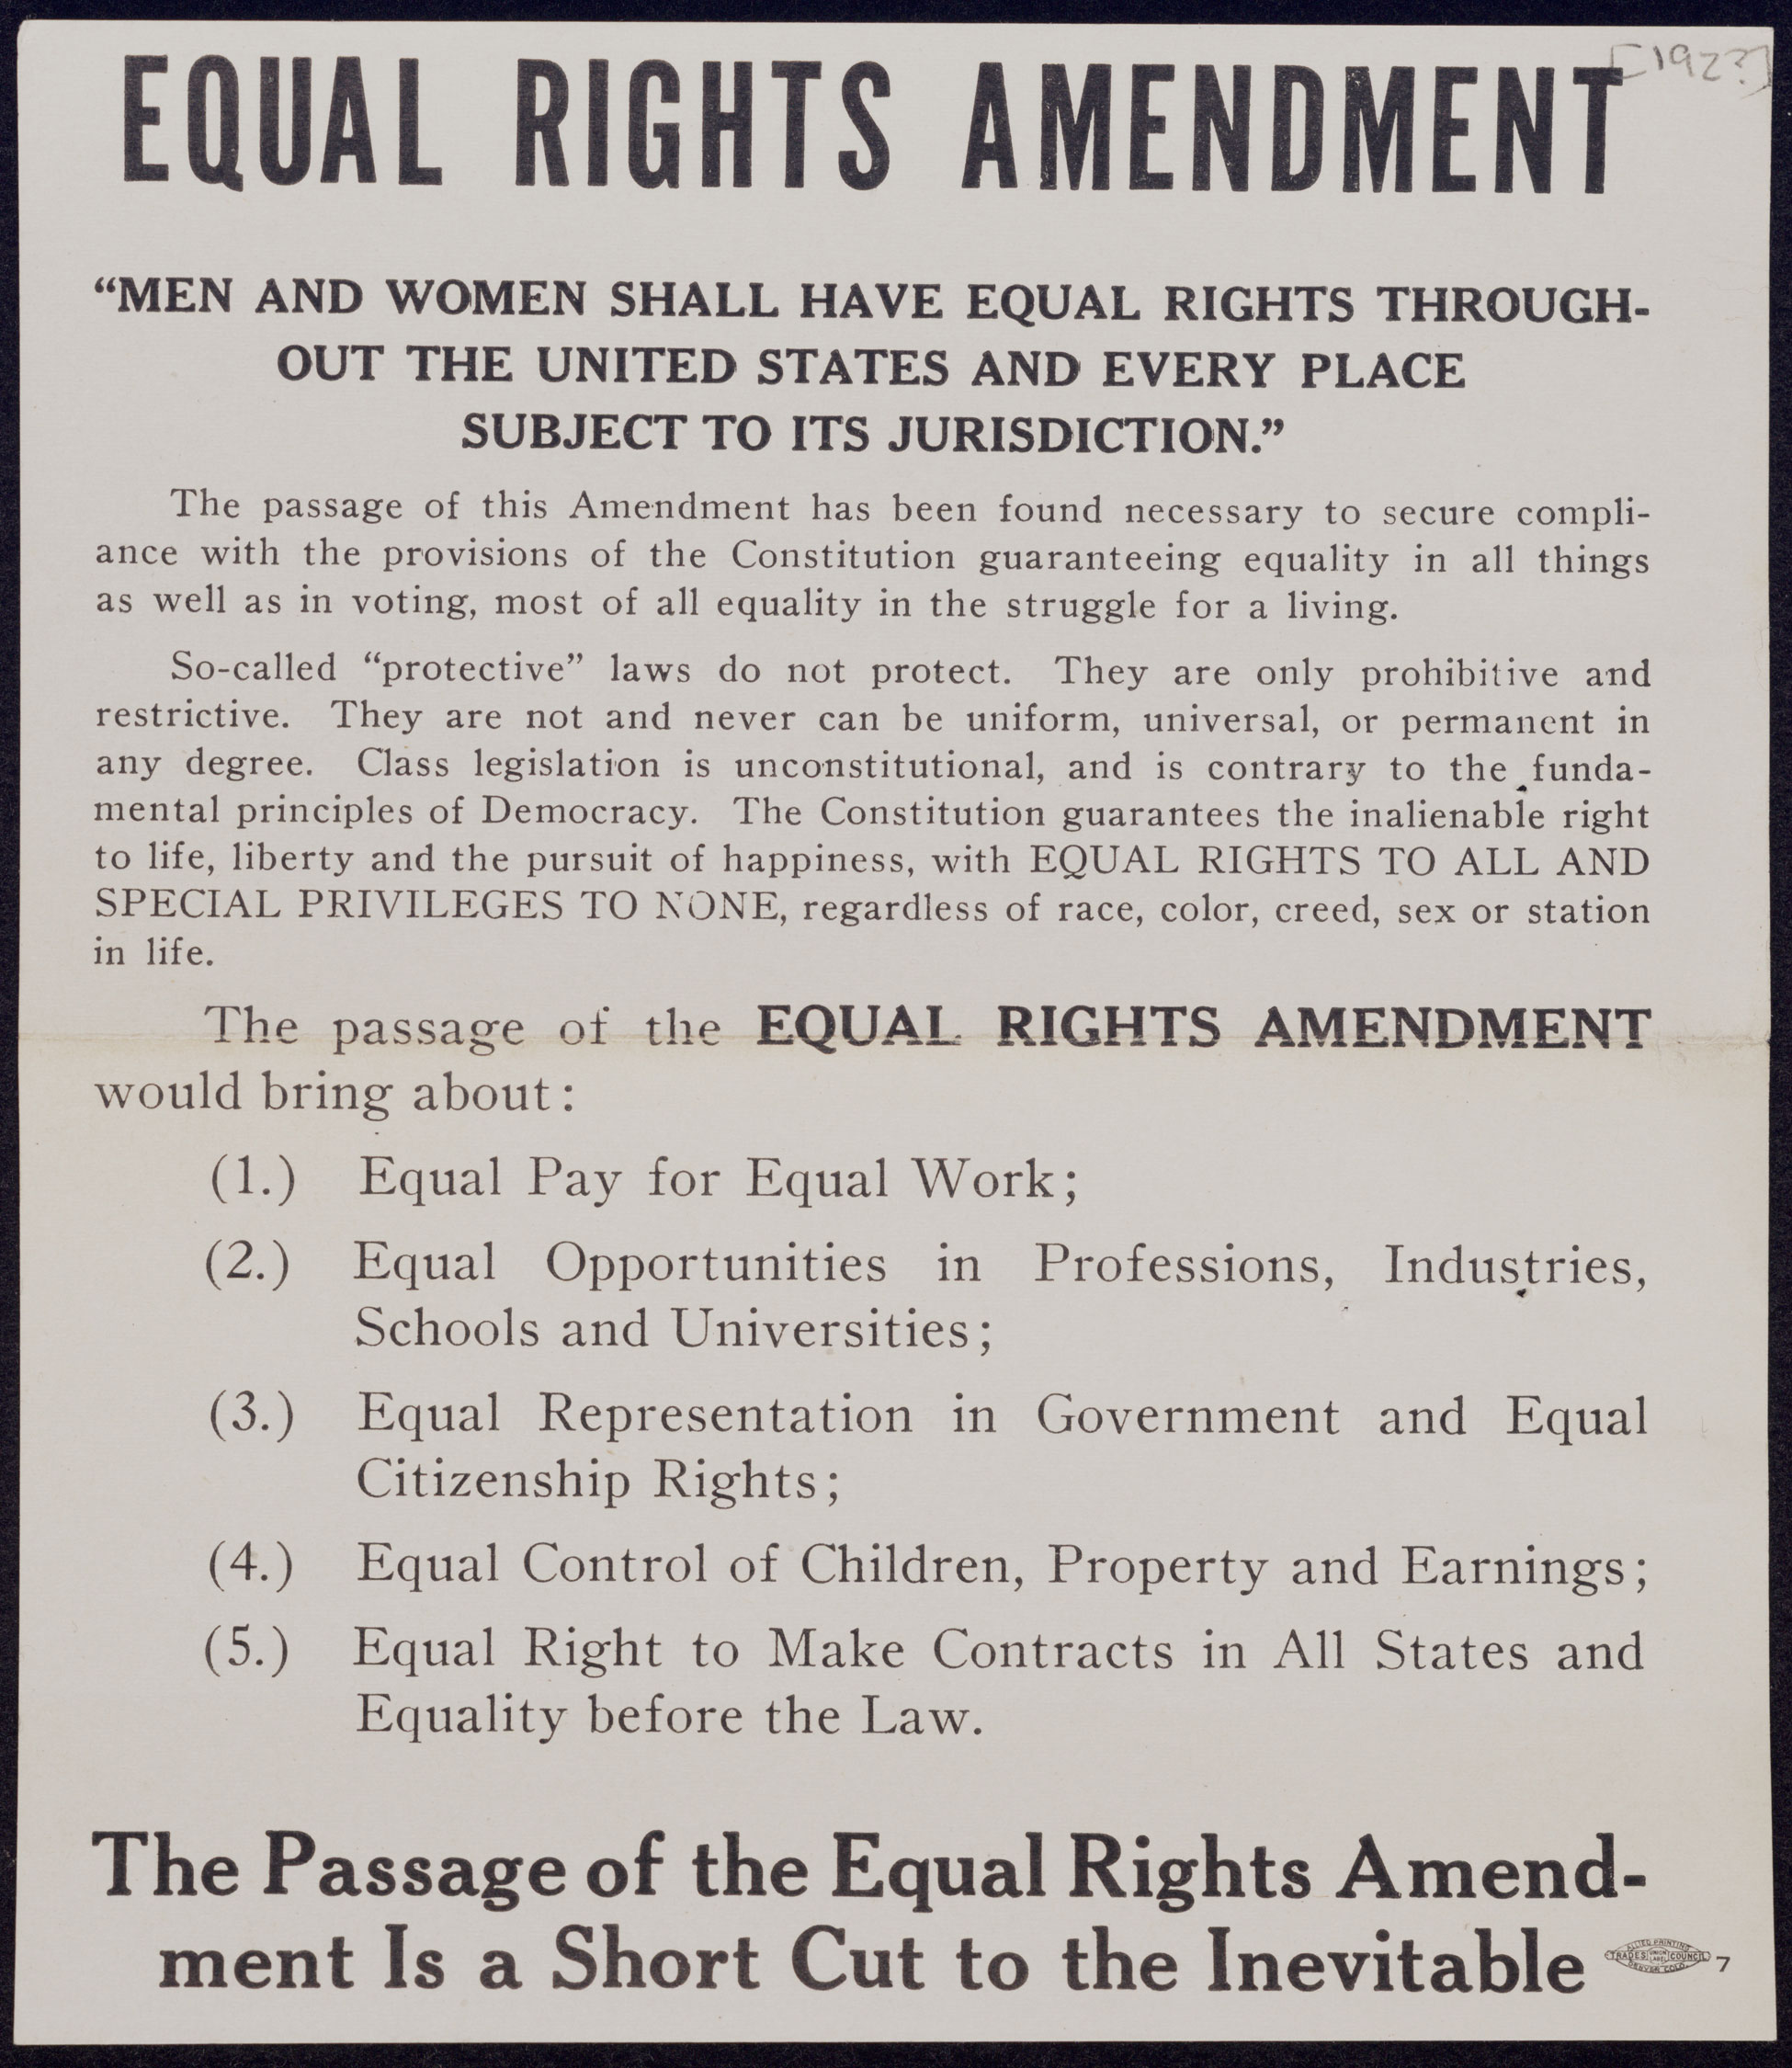 Handbill supporting the Equal Rights Amendment from the 1920s.